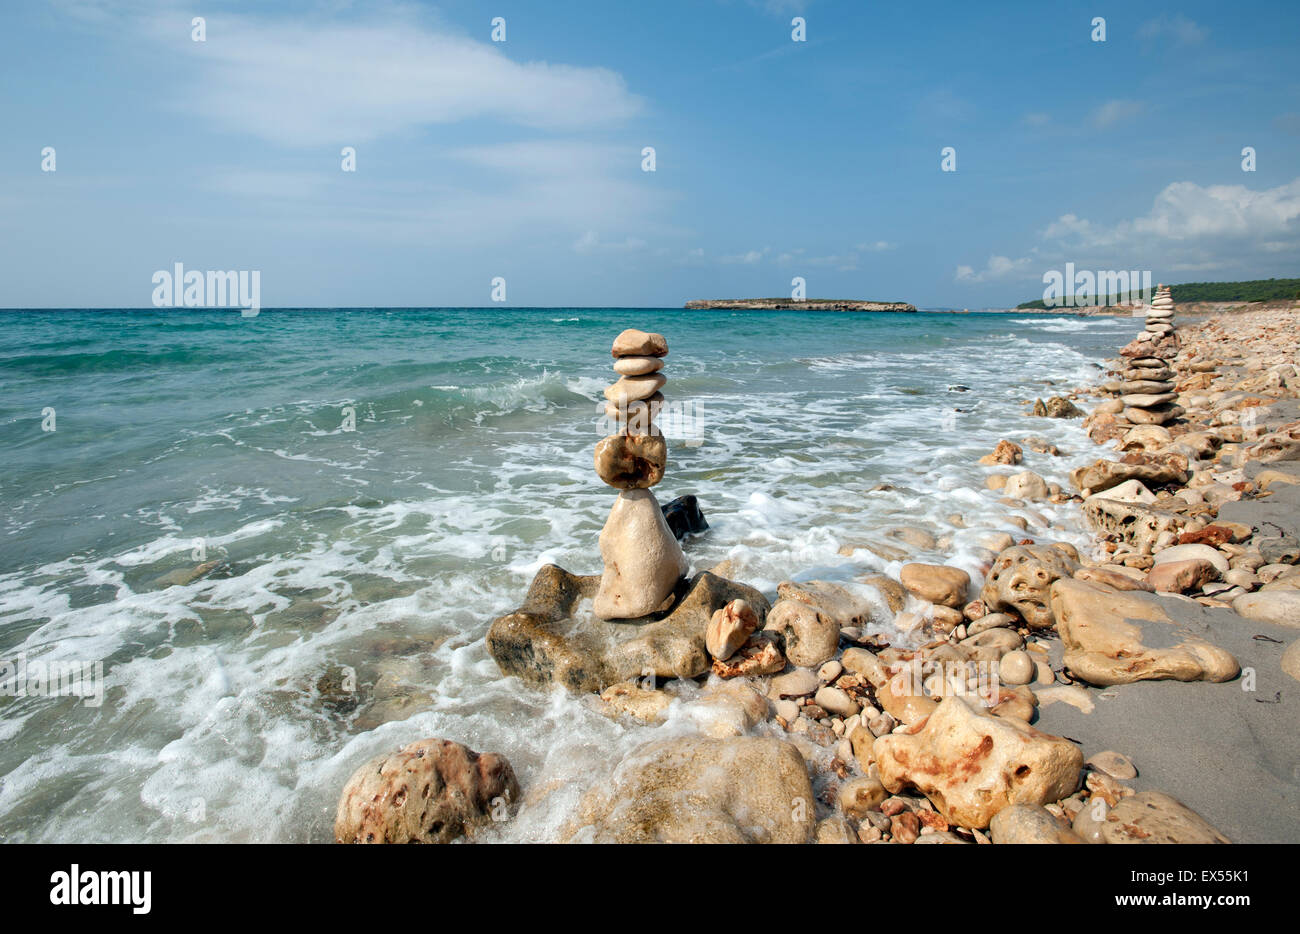 A pile of beach stones made into a sculpture tower on the shoreline of Sant Tomas beach on the island of Menorca Spain Stock Photo